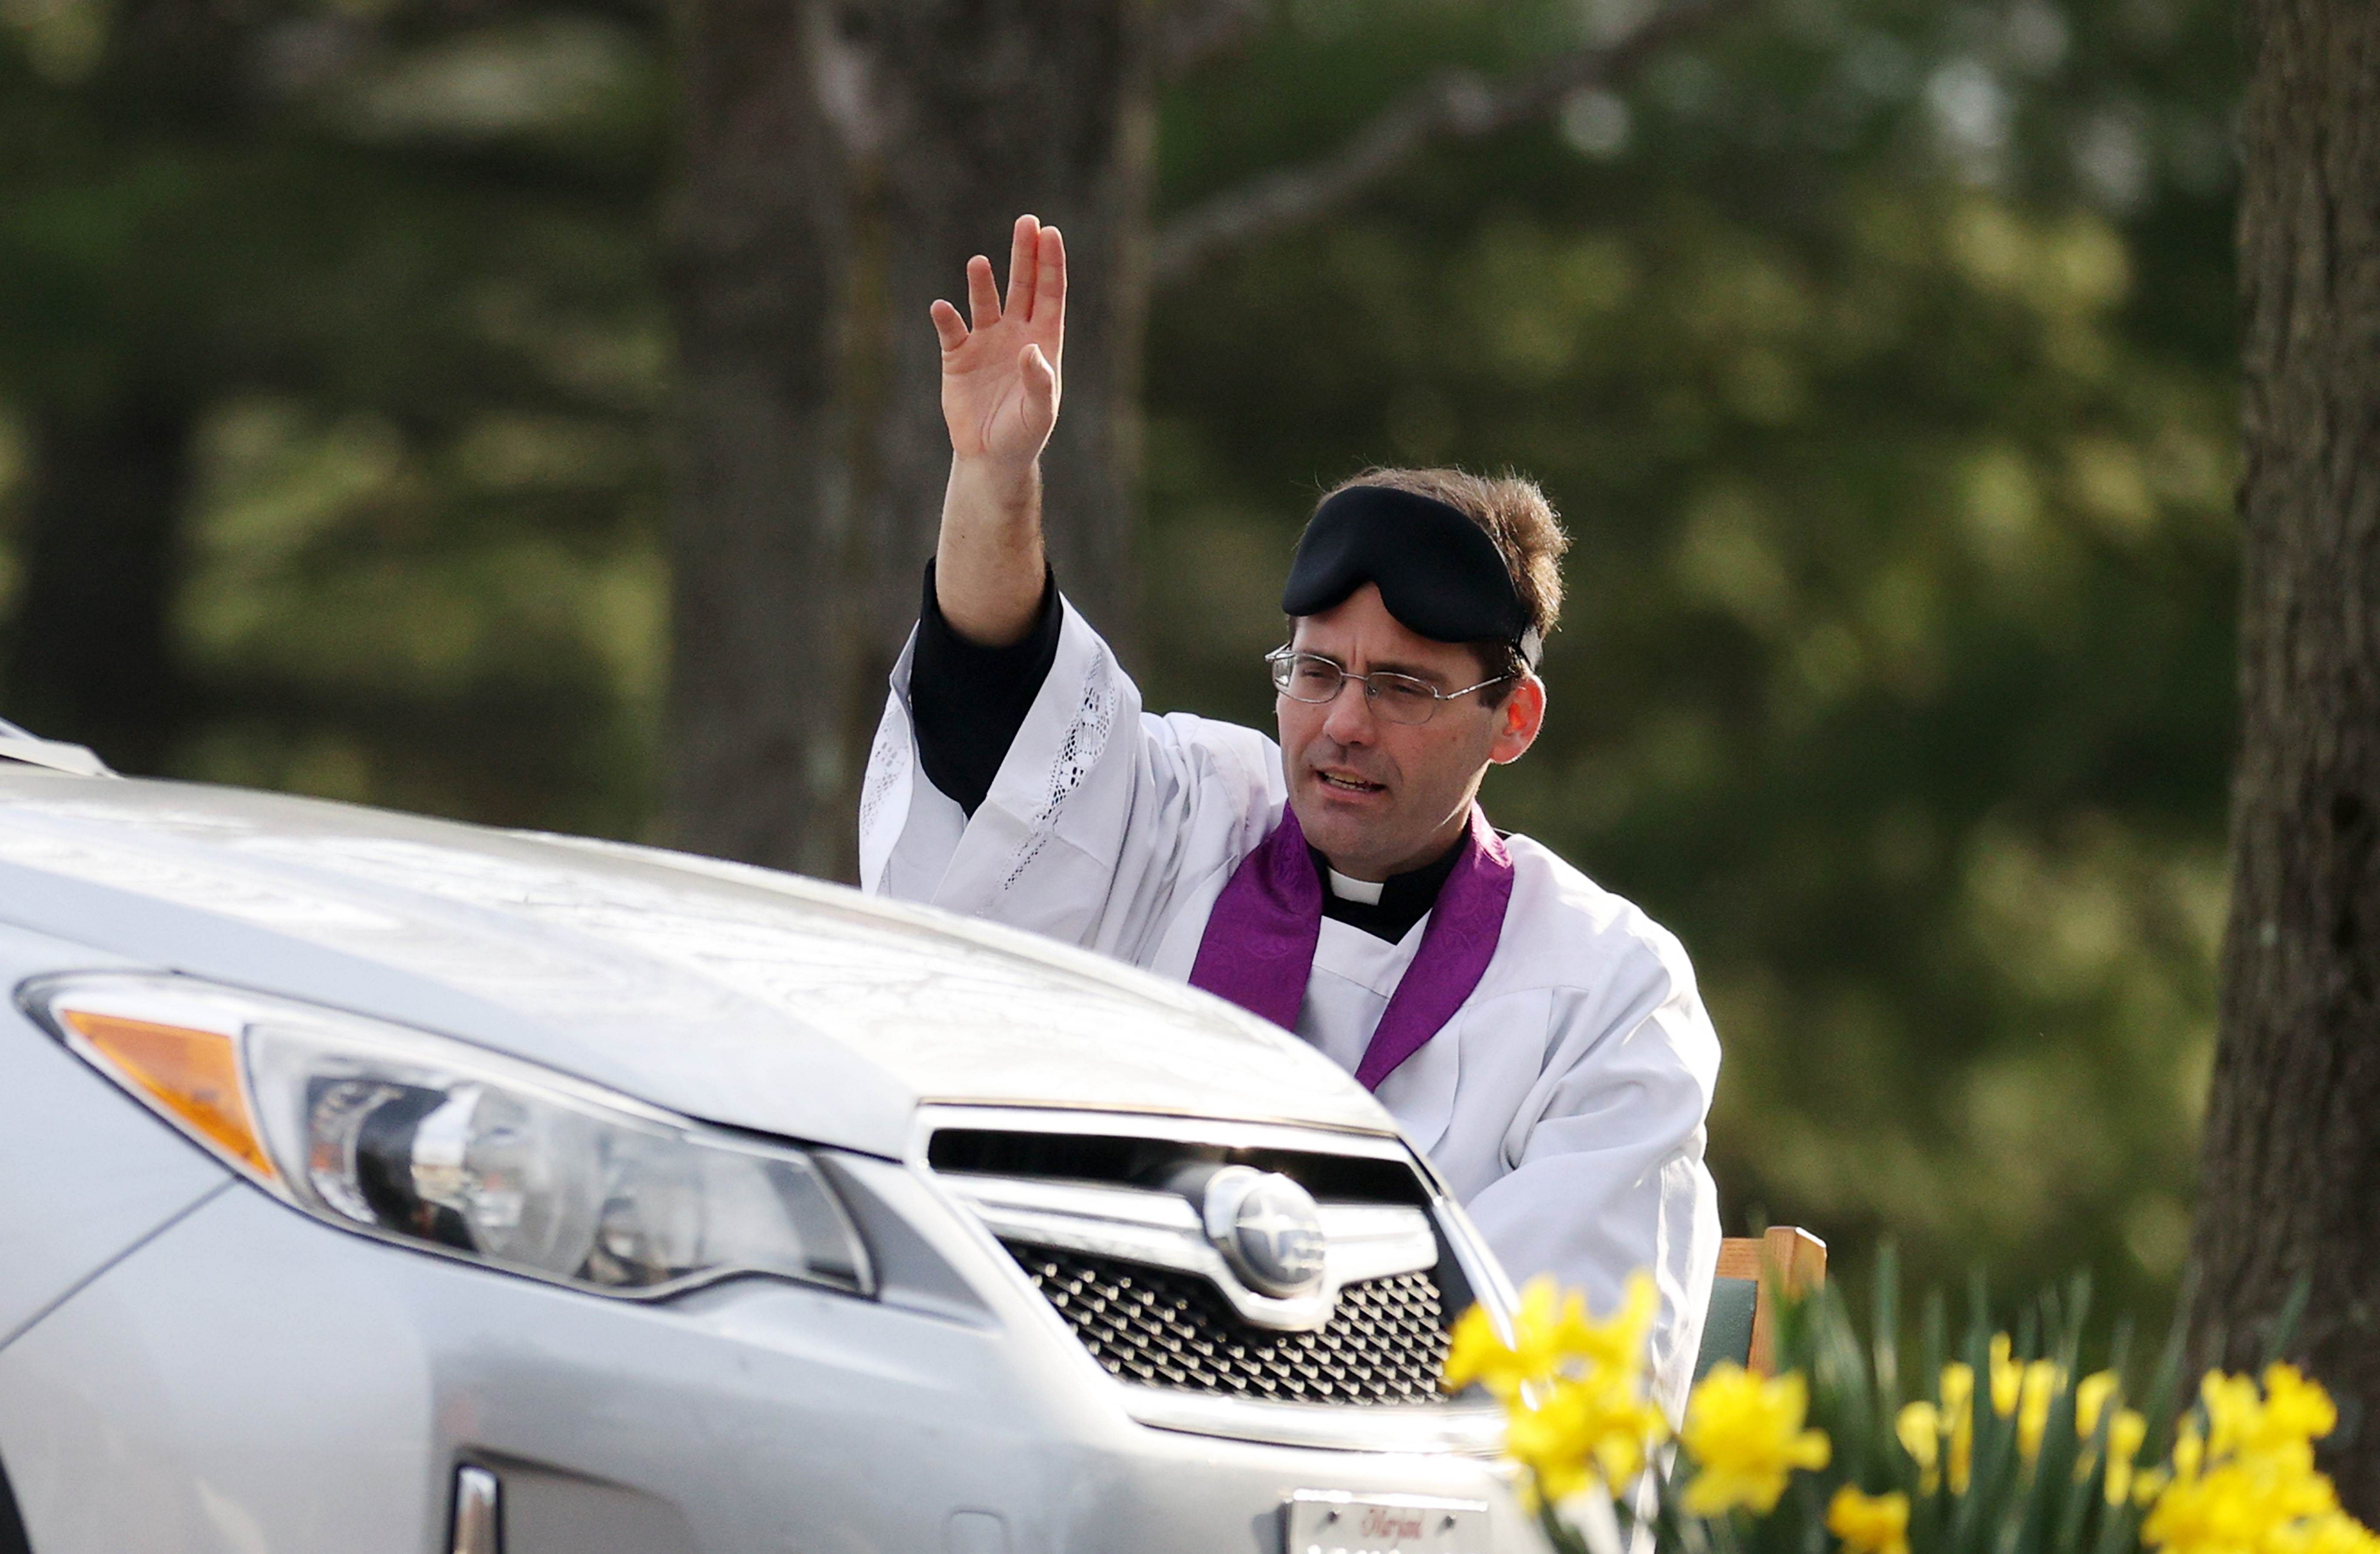 The Rev. Scott Holmer of St. Edward the Confessor Catholic Church makes the sign of the cross after holding confession in the church parking lot on March 20, 2020 in Bowie, Maryland. Holmer, who sits six feet away from those in cars, holds drive thru confessions daily in the parking lot of the church due to the outbreak of the COVID-19 pandemic. (Credit: AFP)